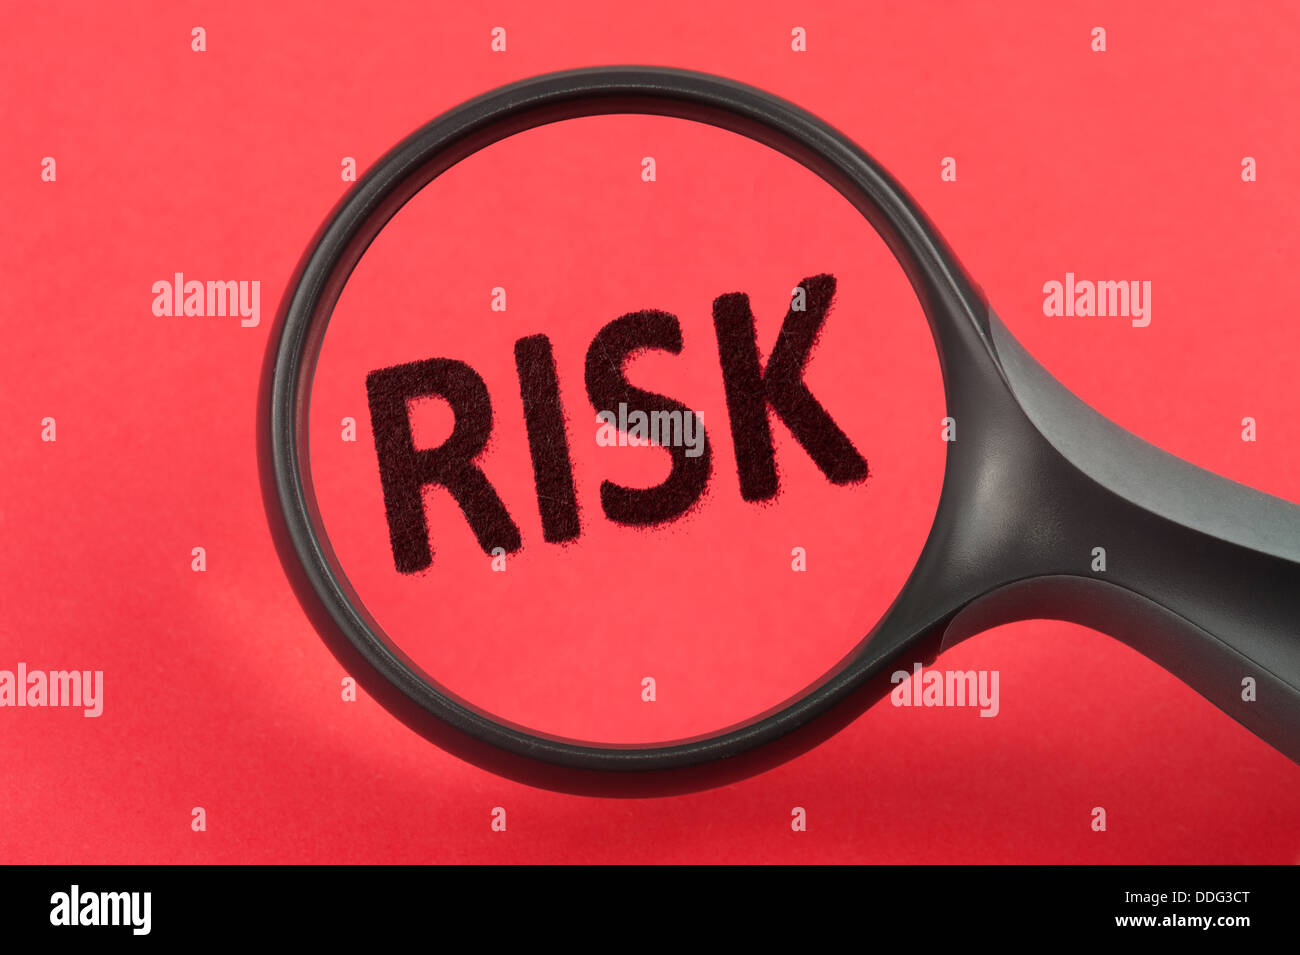 Discovering and analyzing risk with a magnifier Stock Photo